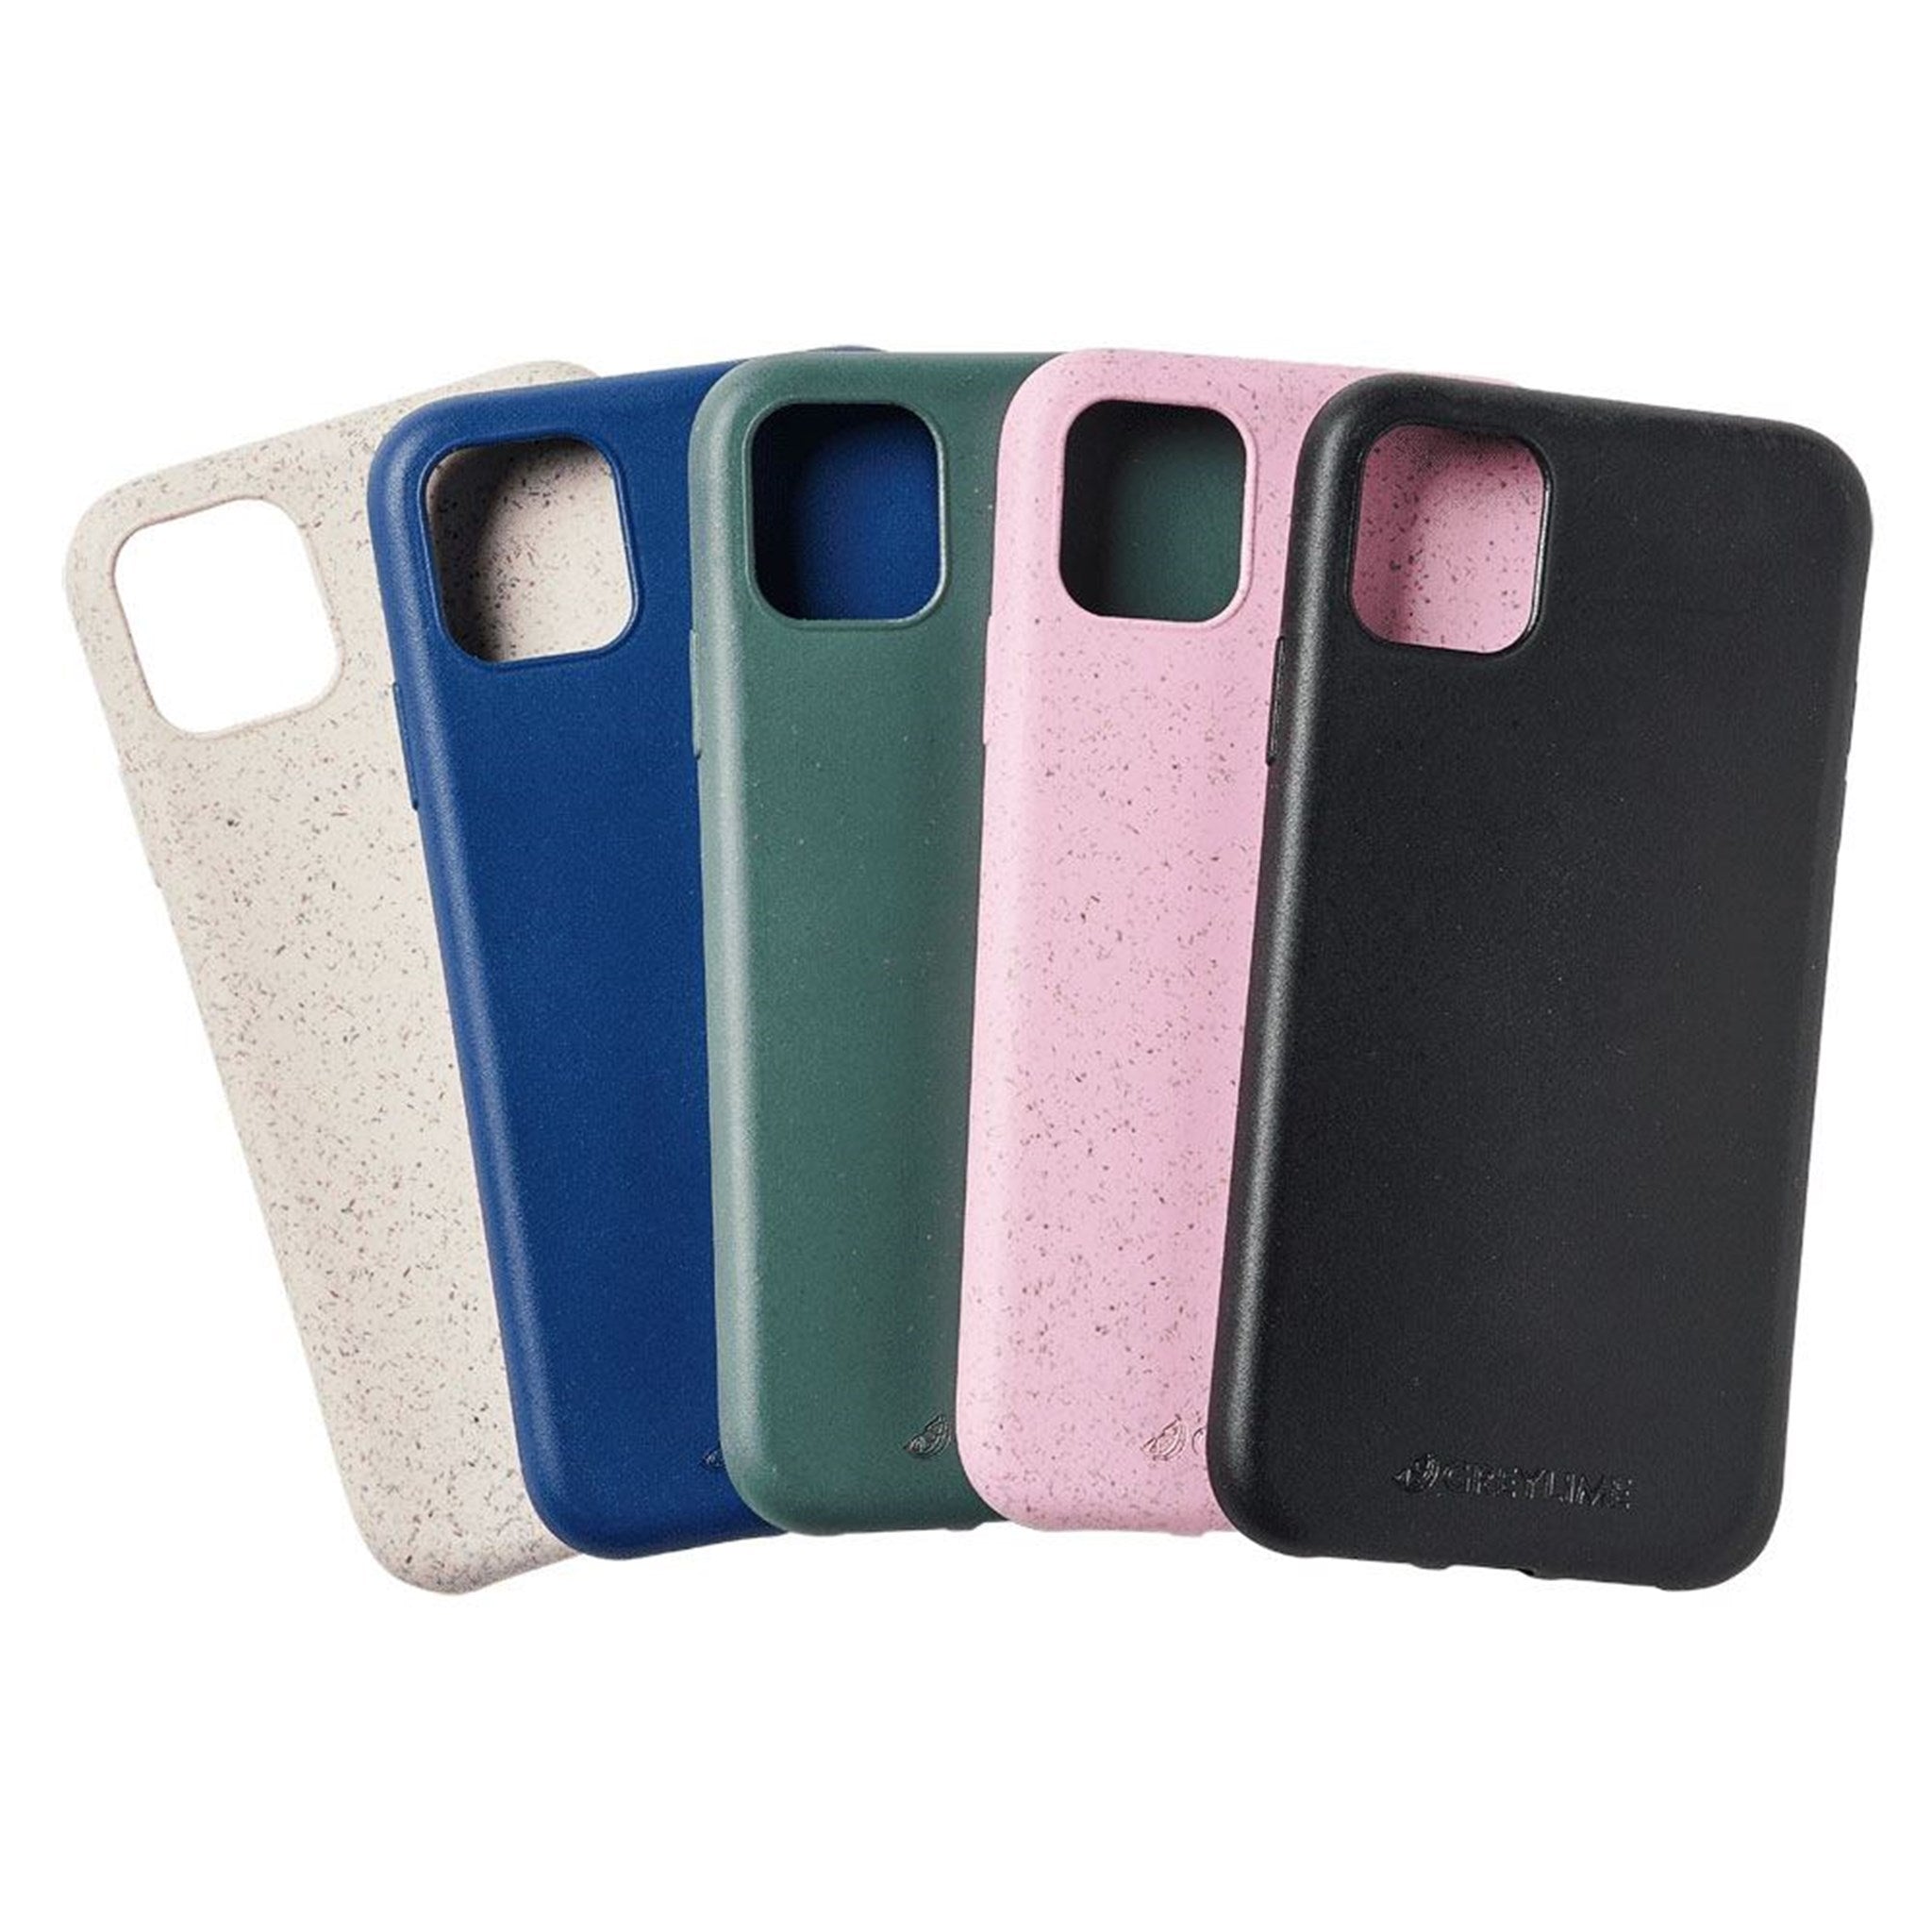 GreyLime-iPhone-11-biodegradable-cover-COIP11-gruppe.jpg